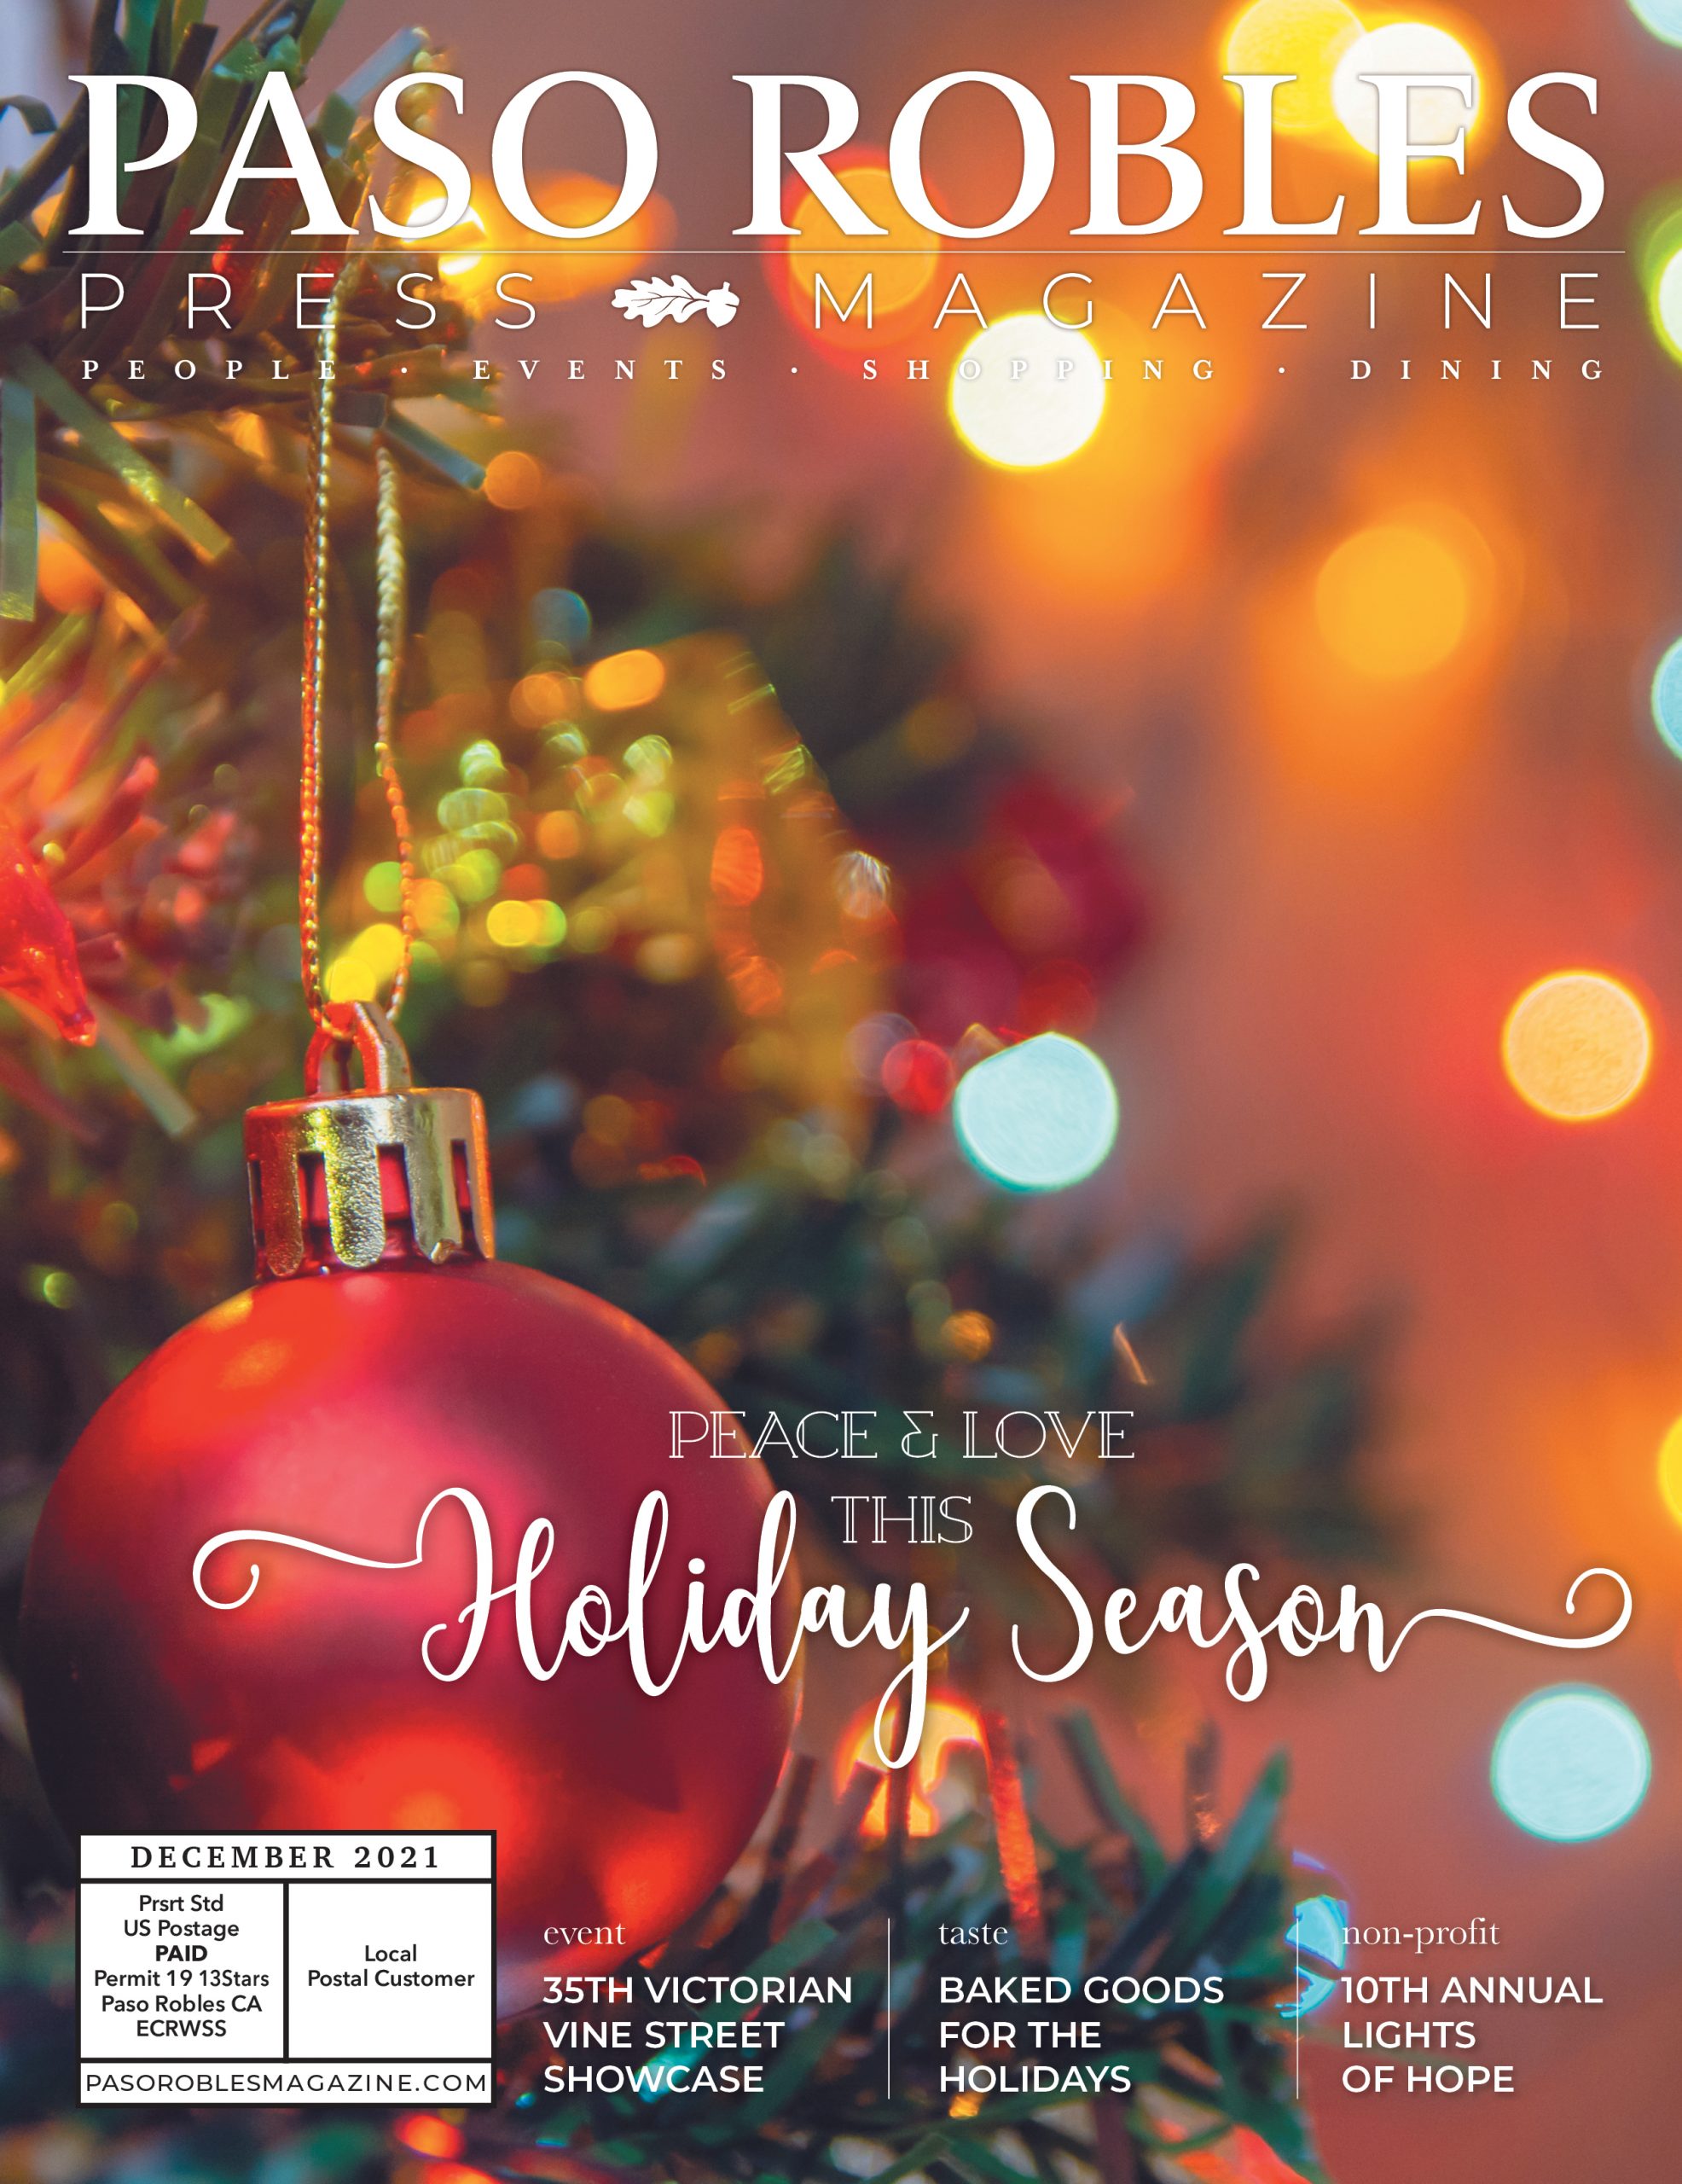 Paso Robles News Magazine • December 2021 scaled